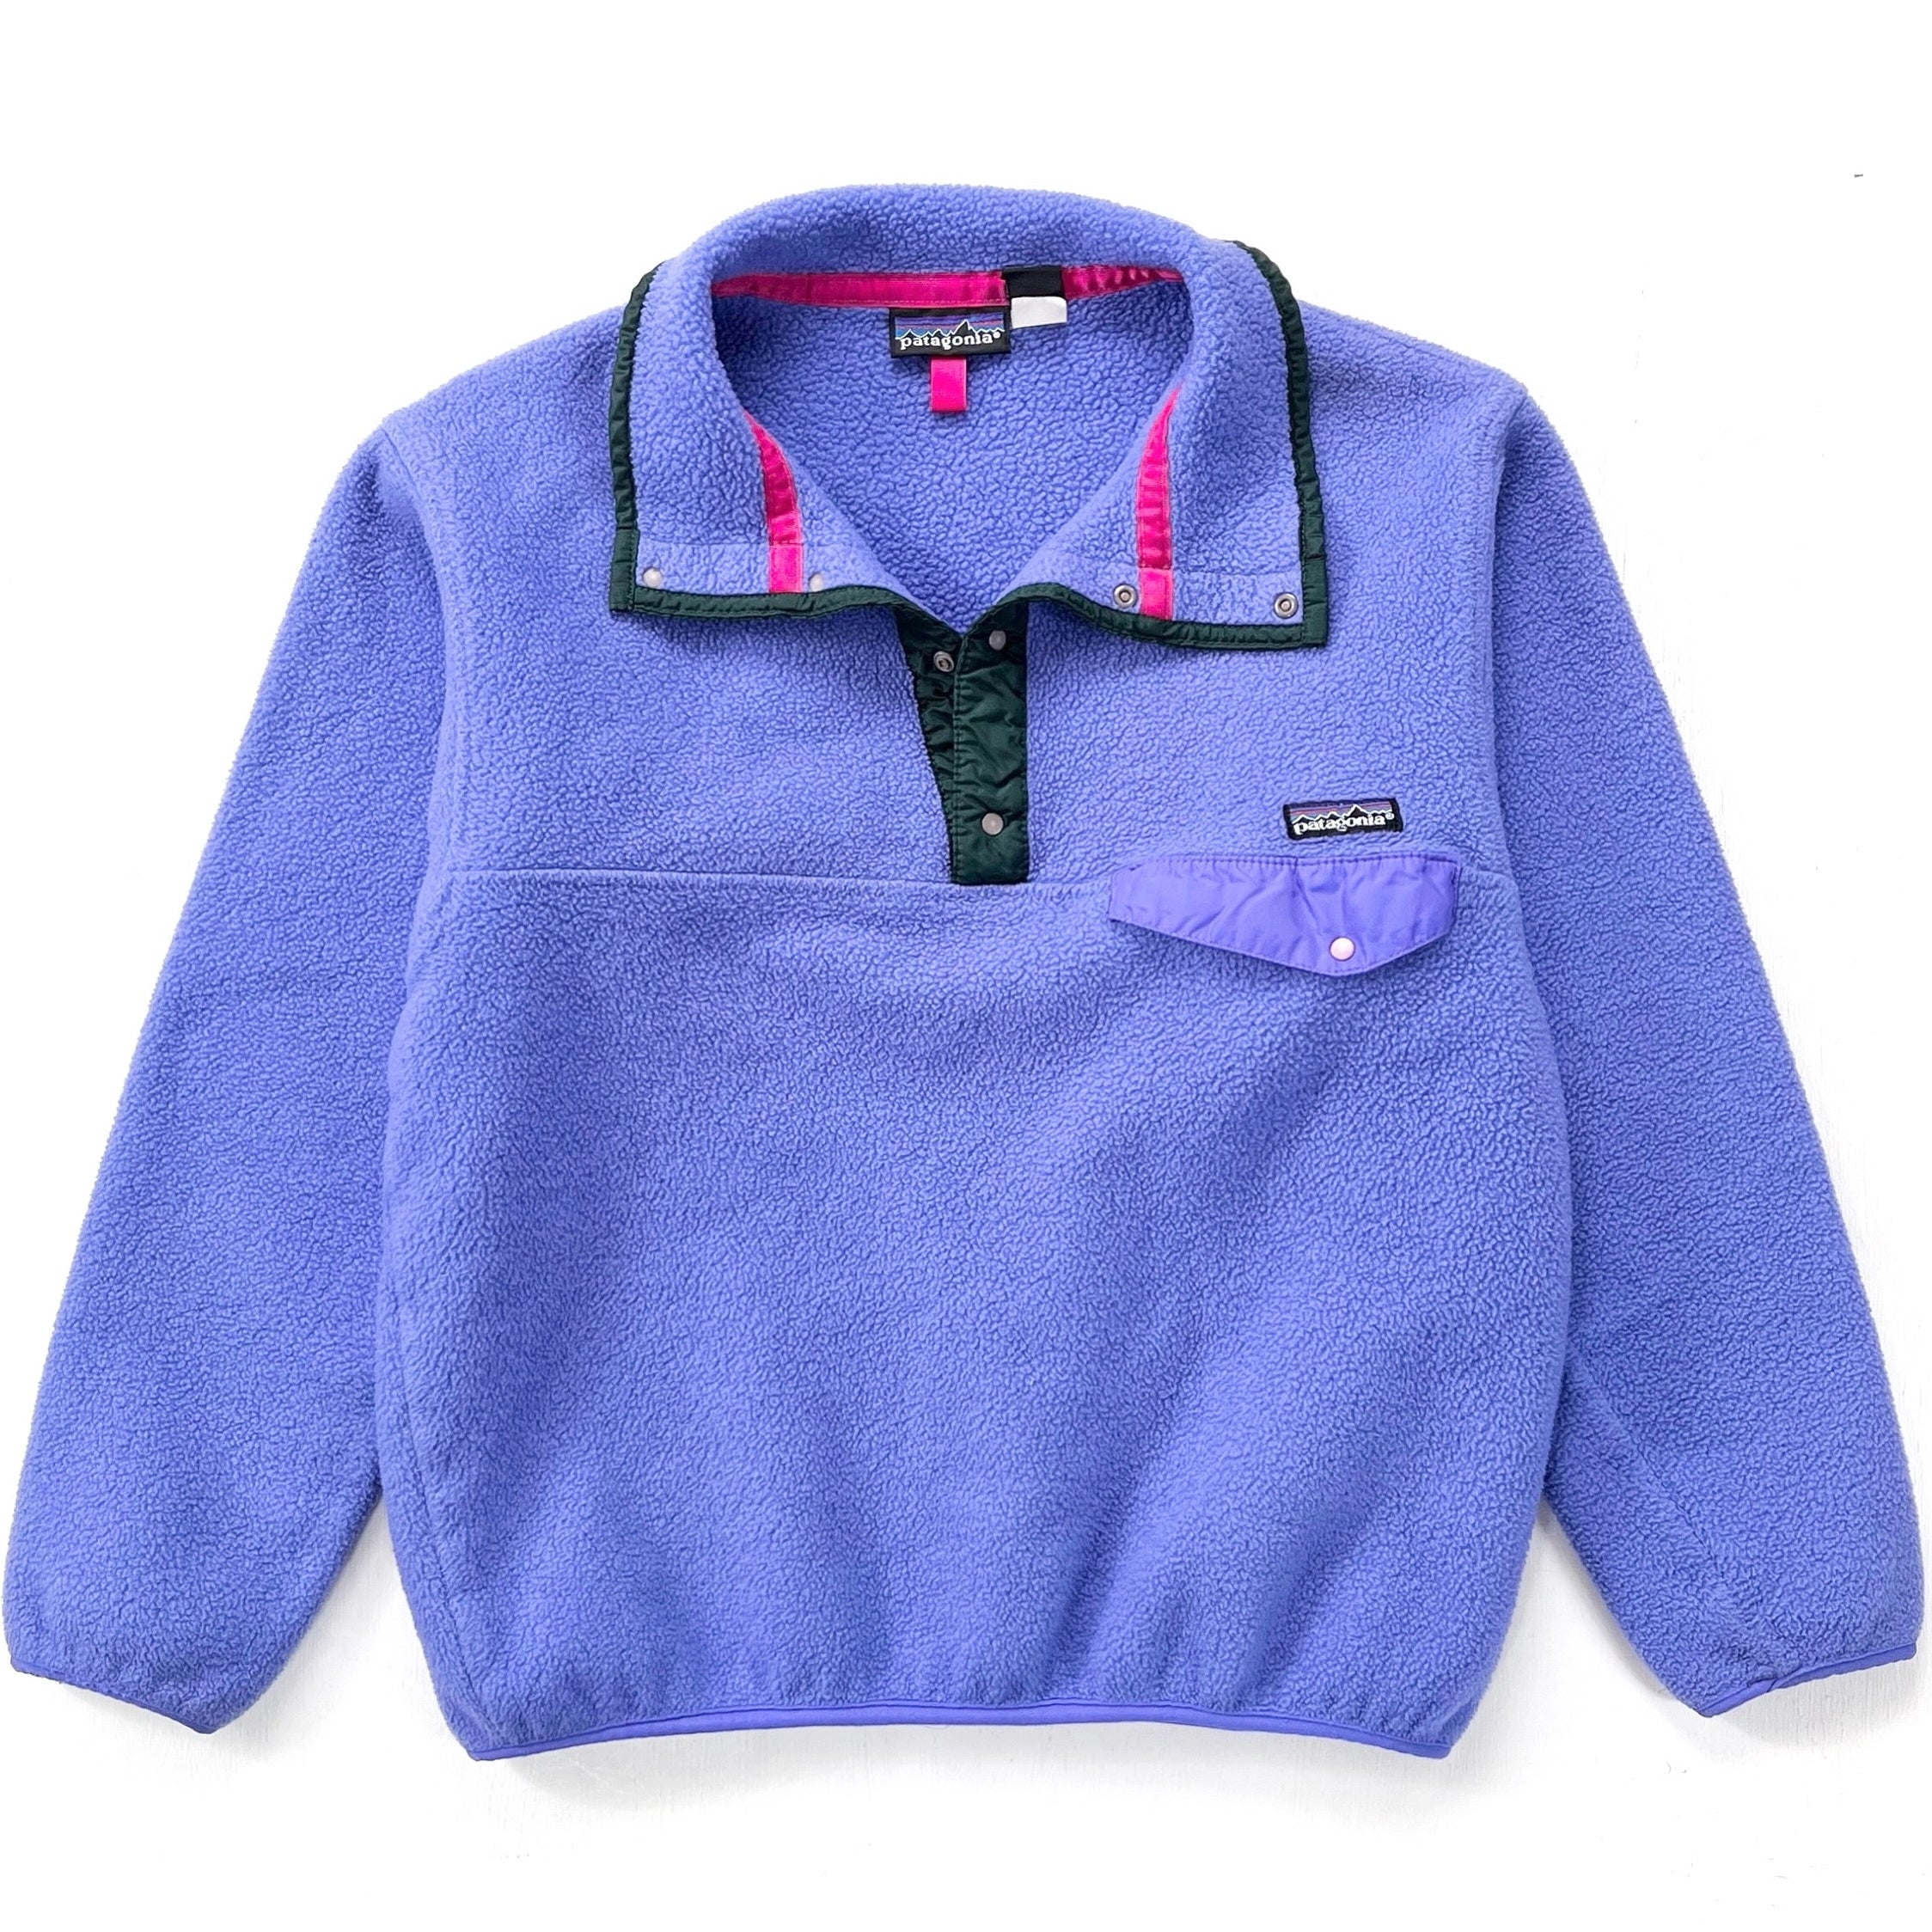 1992 Patagonia Synchilla Snap-T Pullover, Periwinkle & Hunter (S)